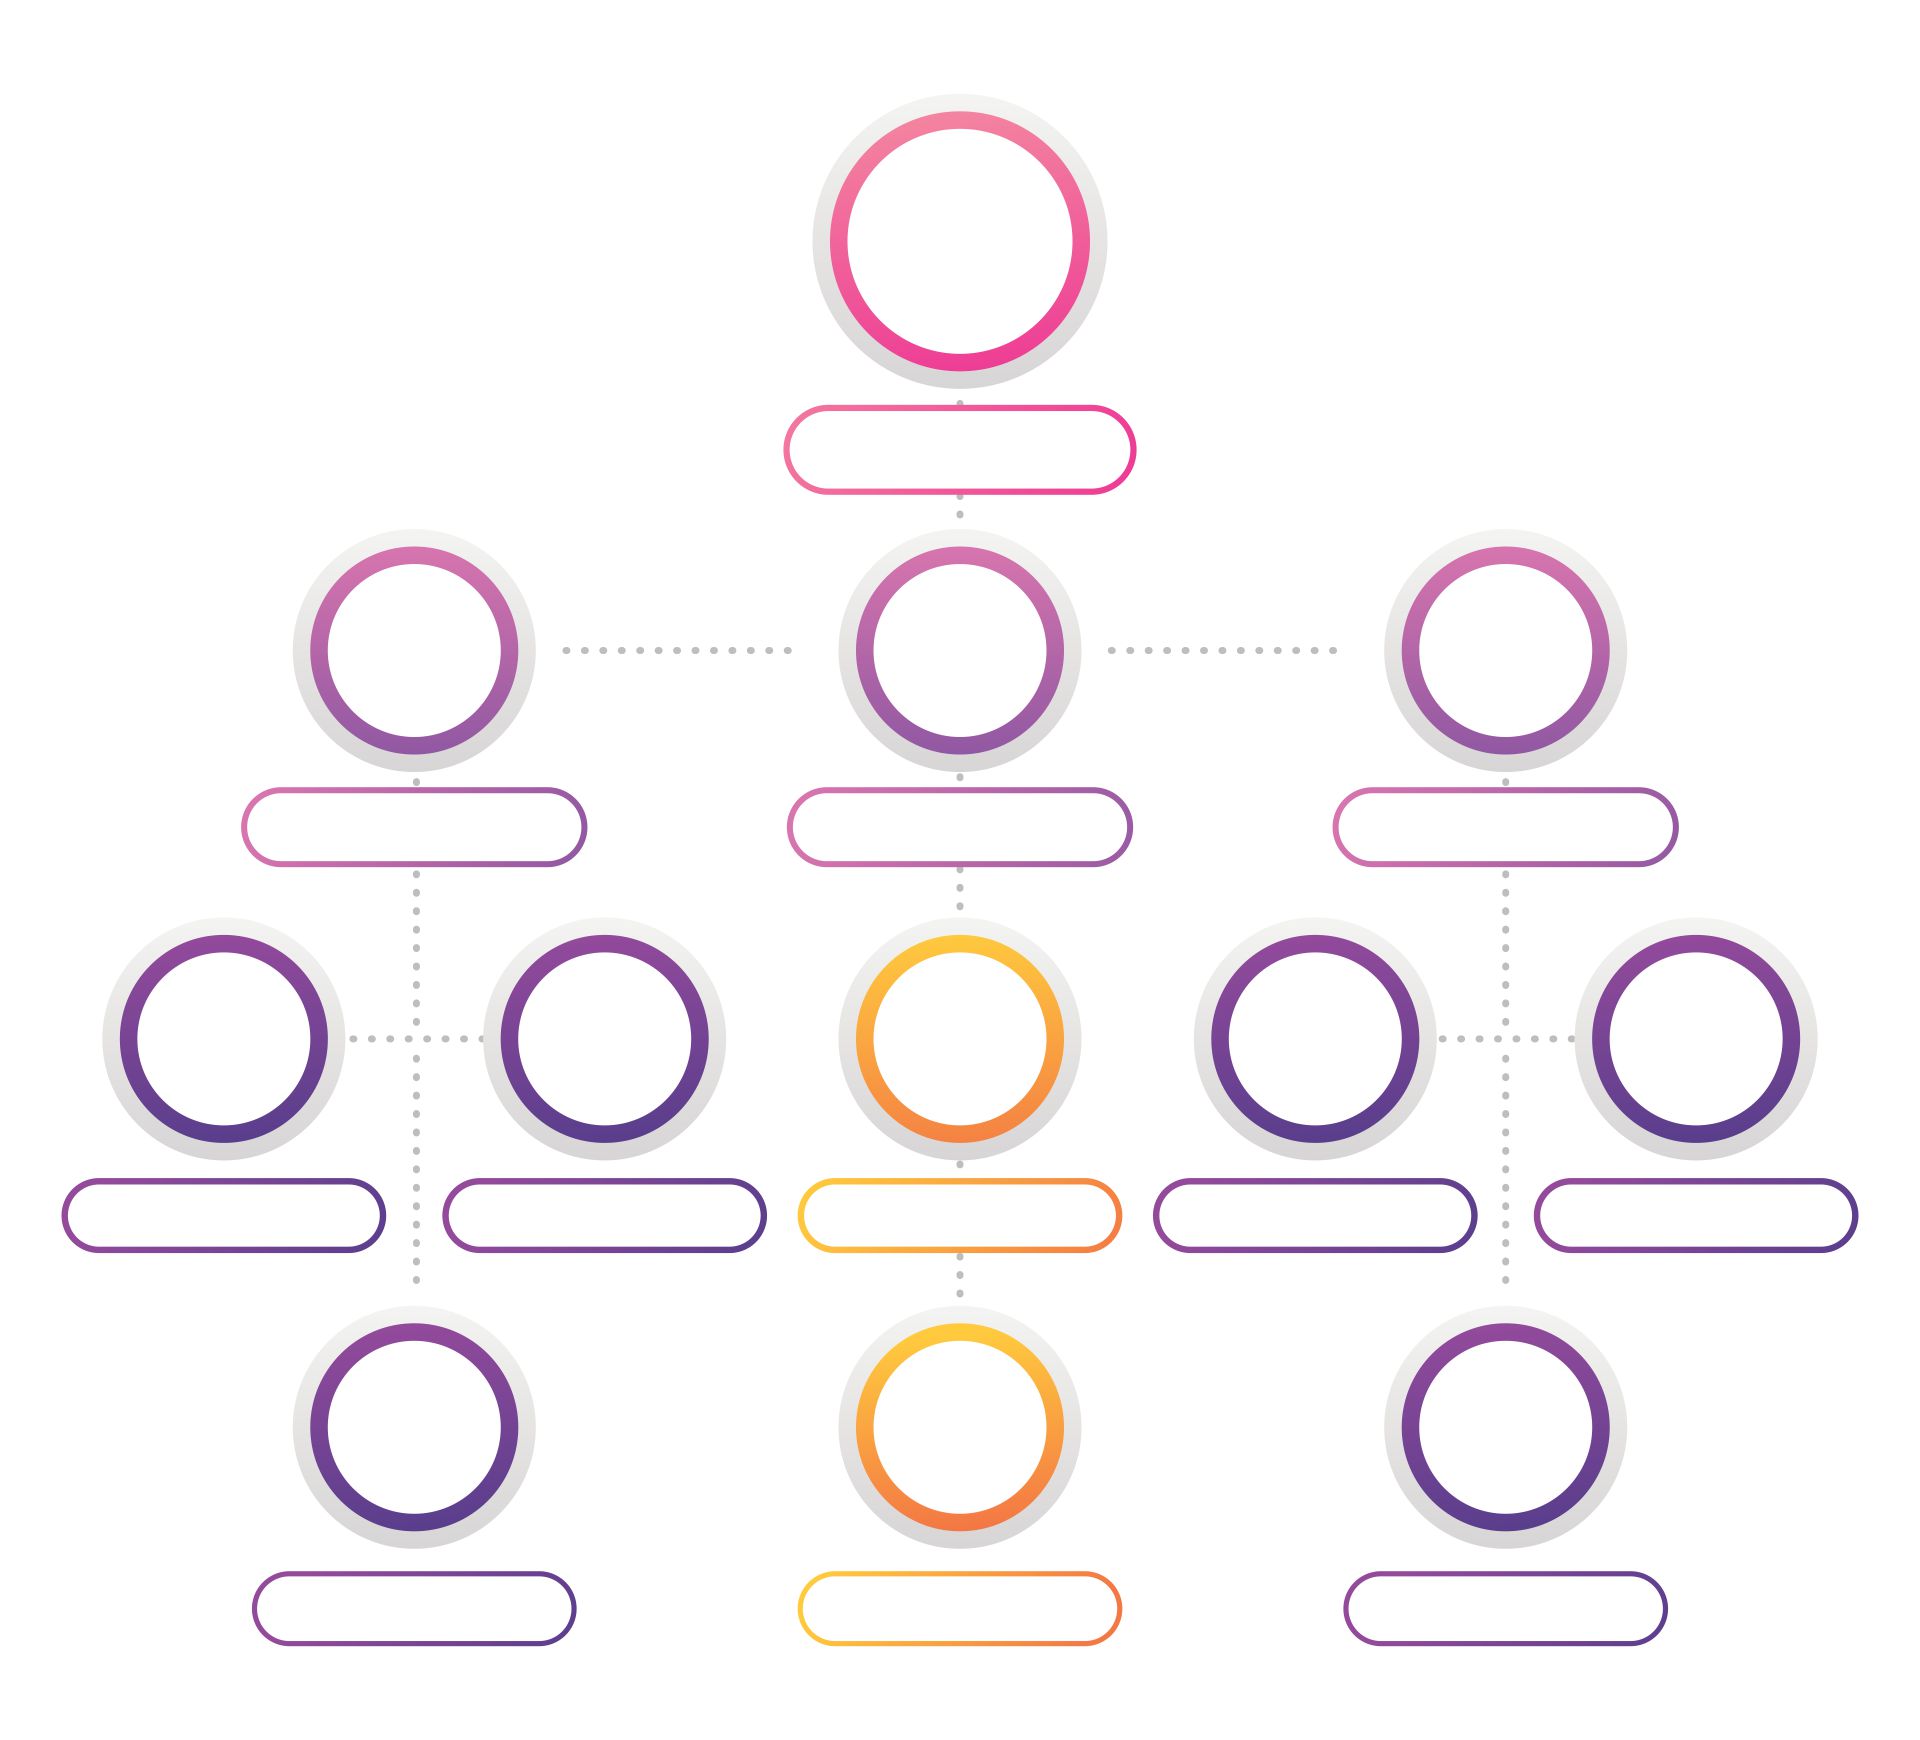 Printable Organizational Structures For Companies Templatye